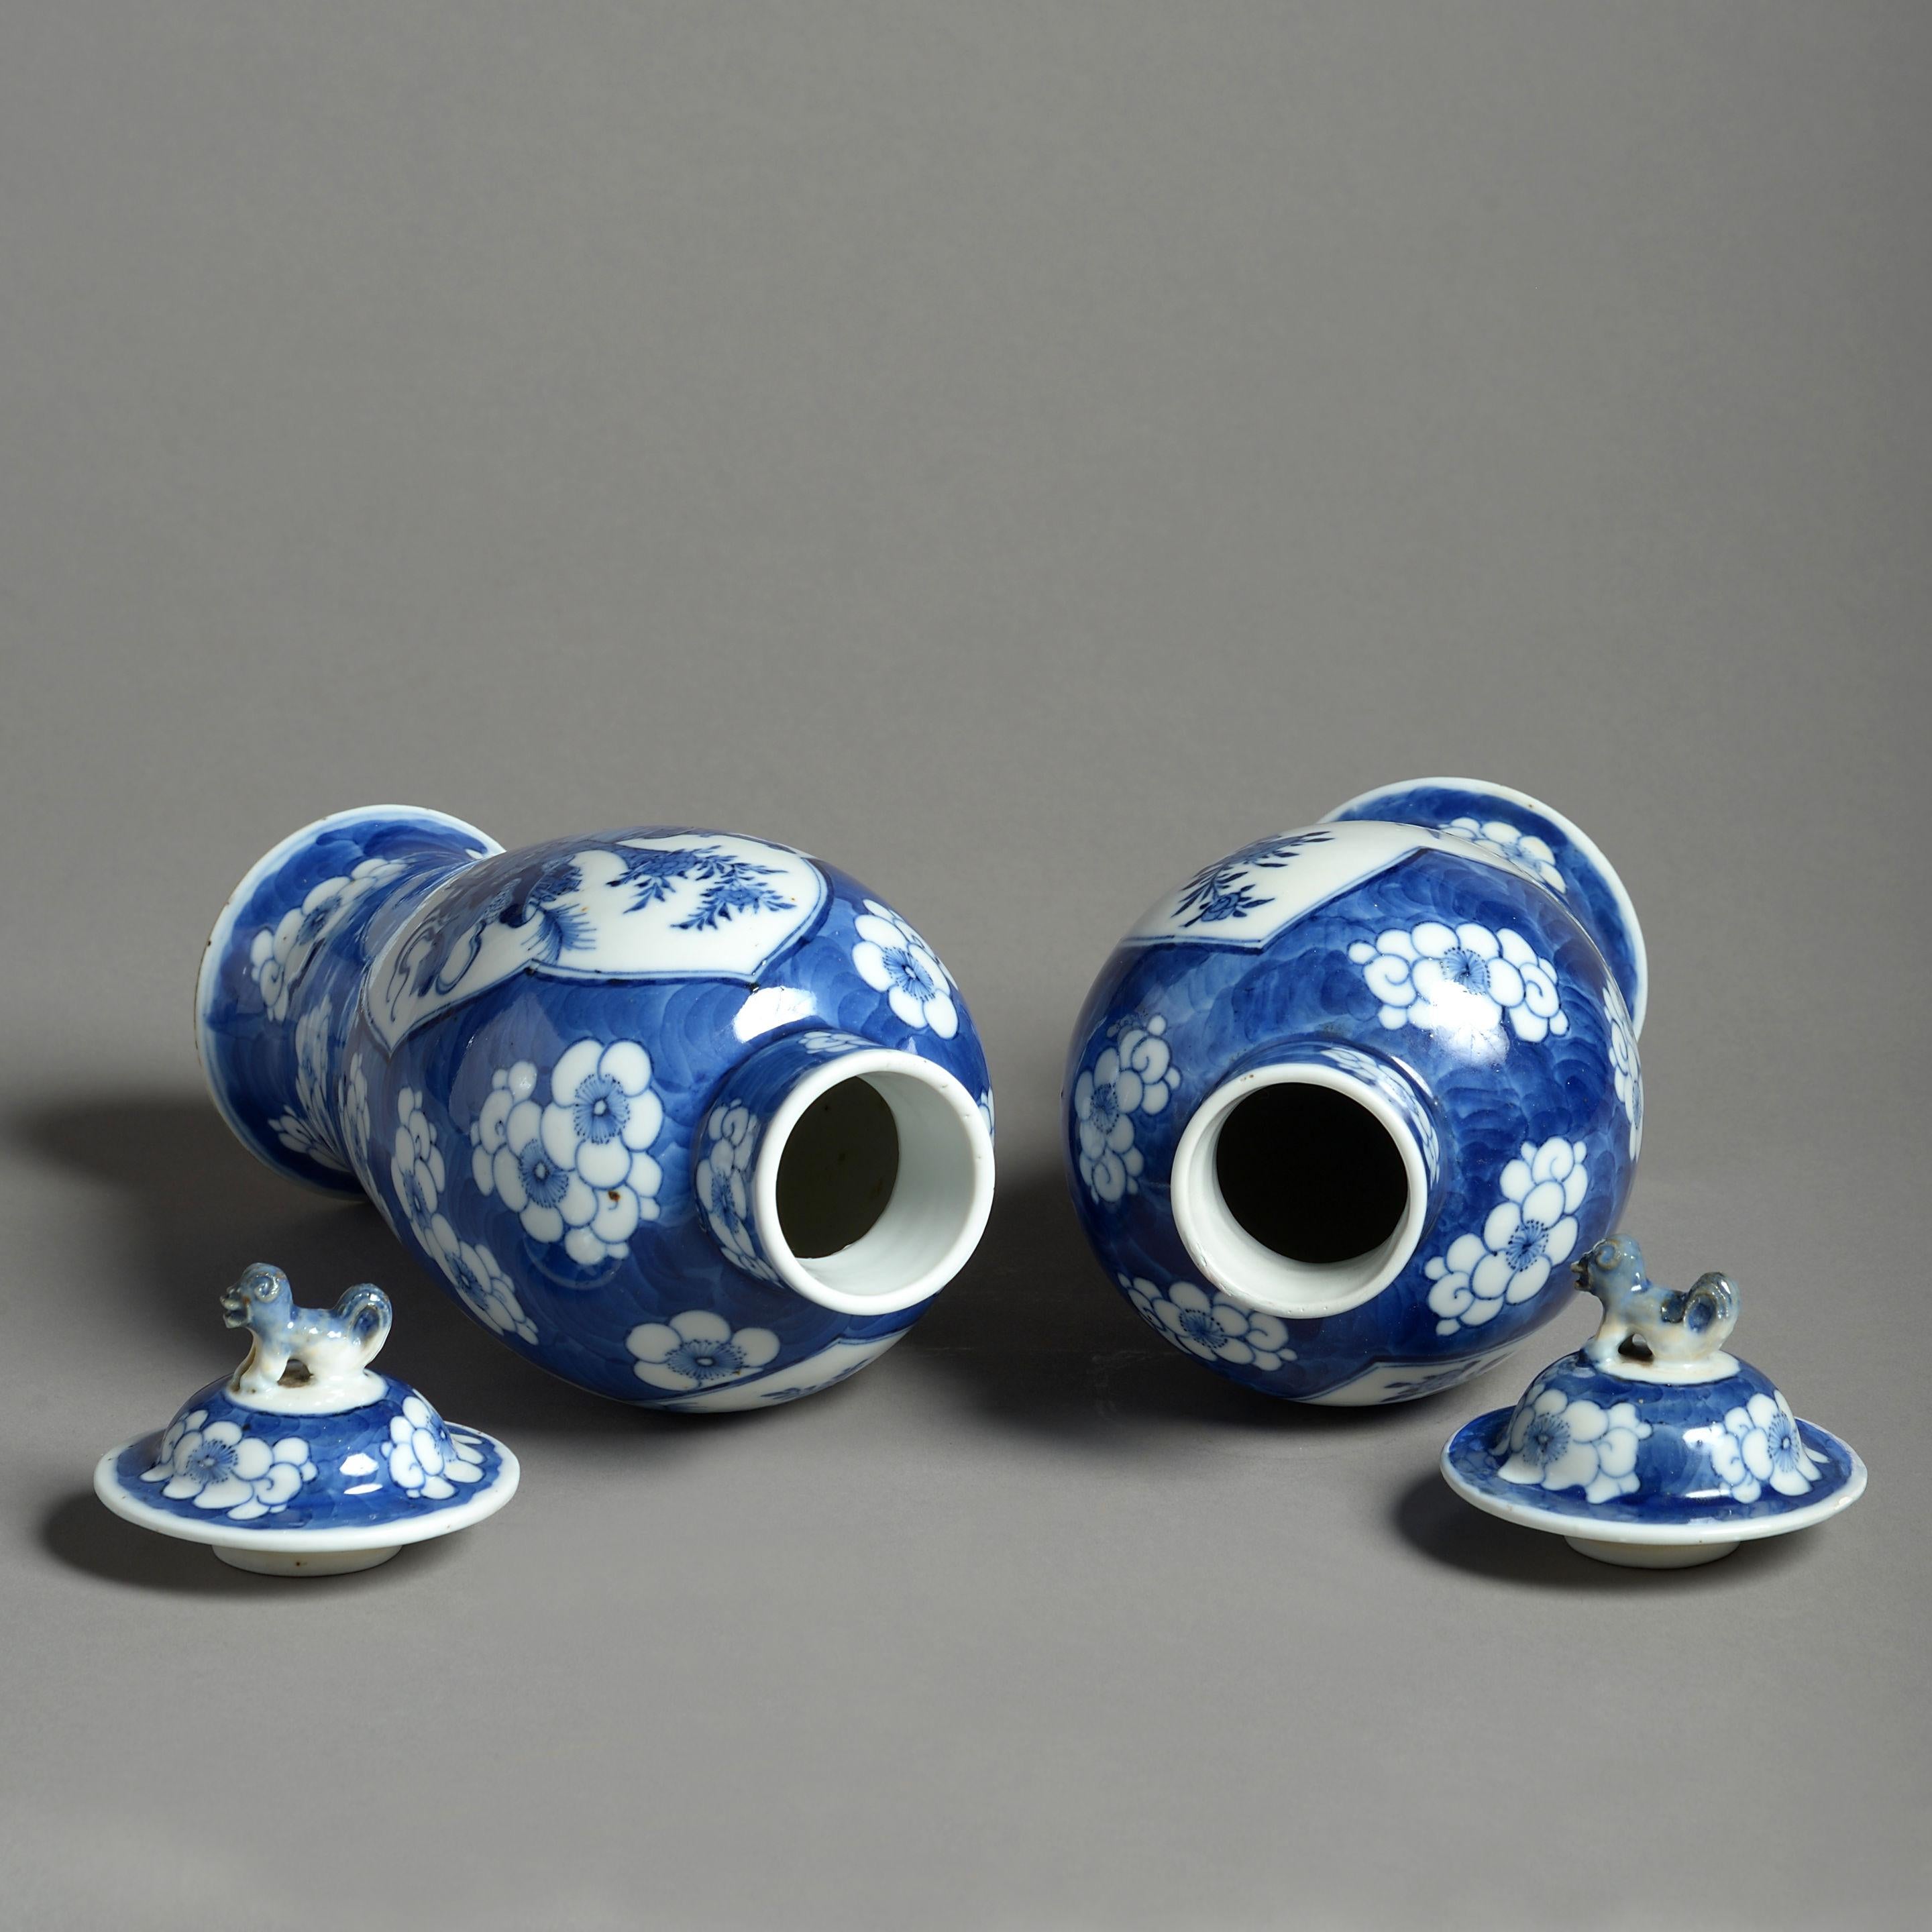 Mid-19th Century 19th Century Pair of Blue and White Porcelain Vases